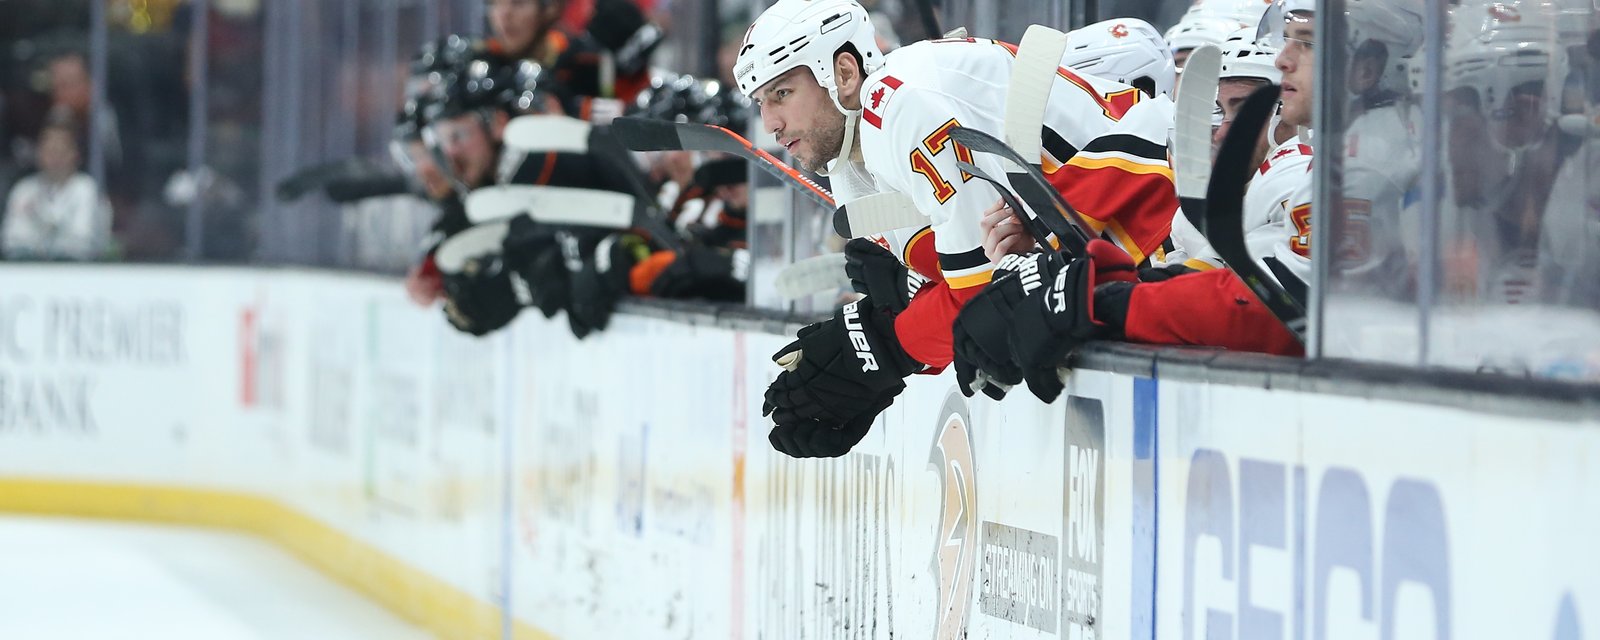 Flames stick with the same lineup that lost on Tuesday